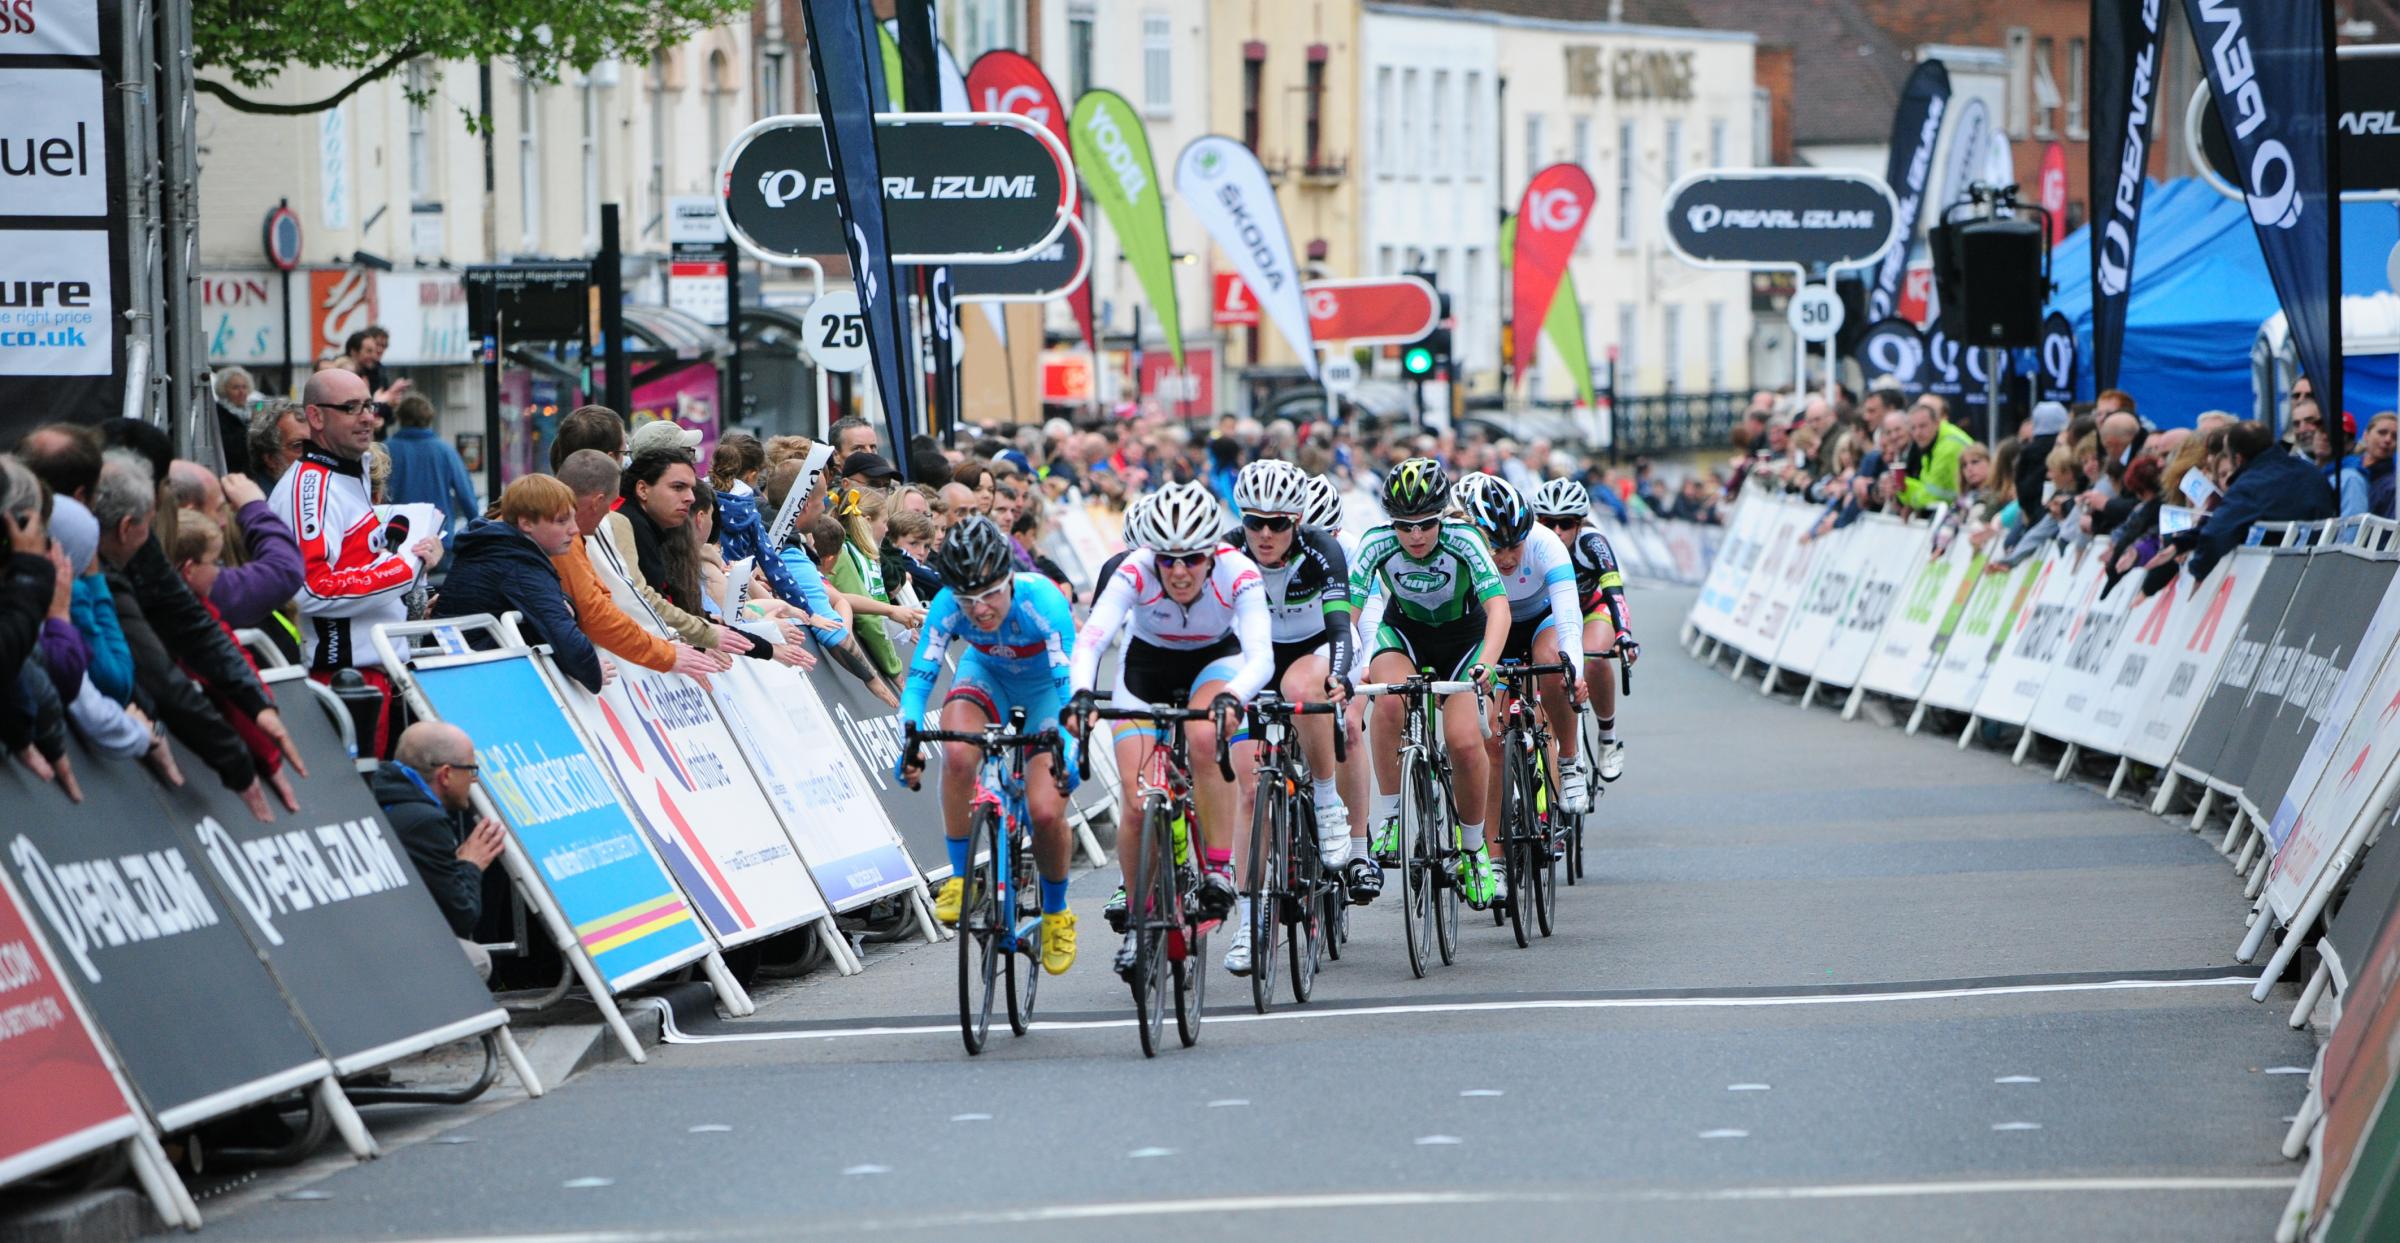 The Tour Series taking place in Colchester in 2013